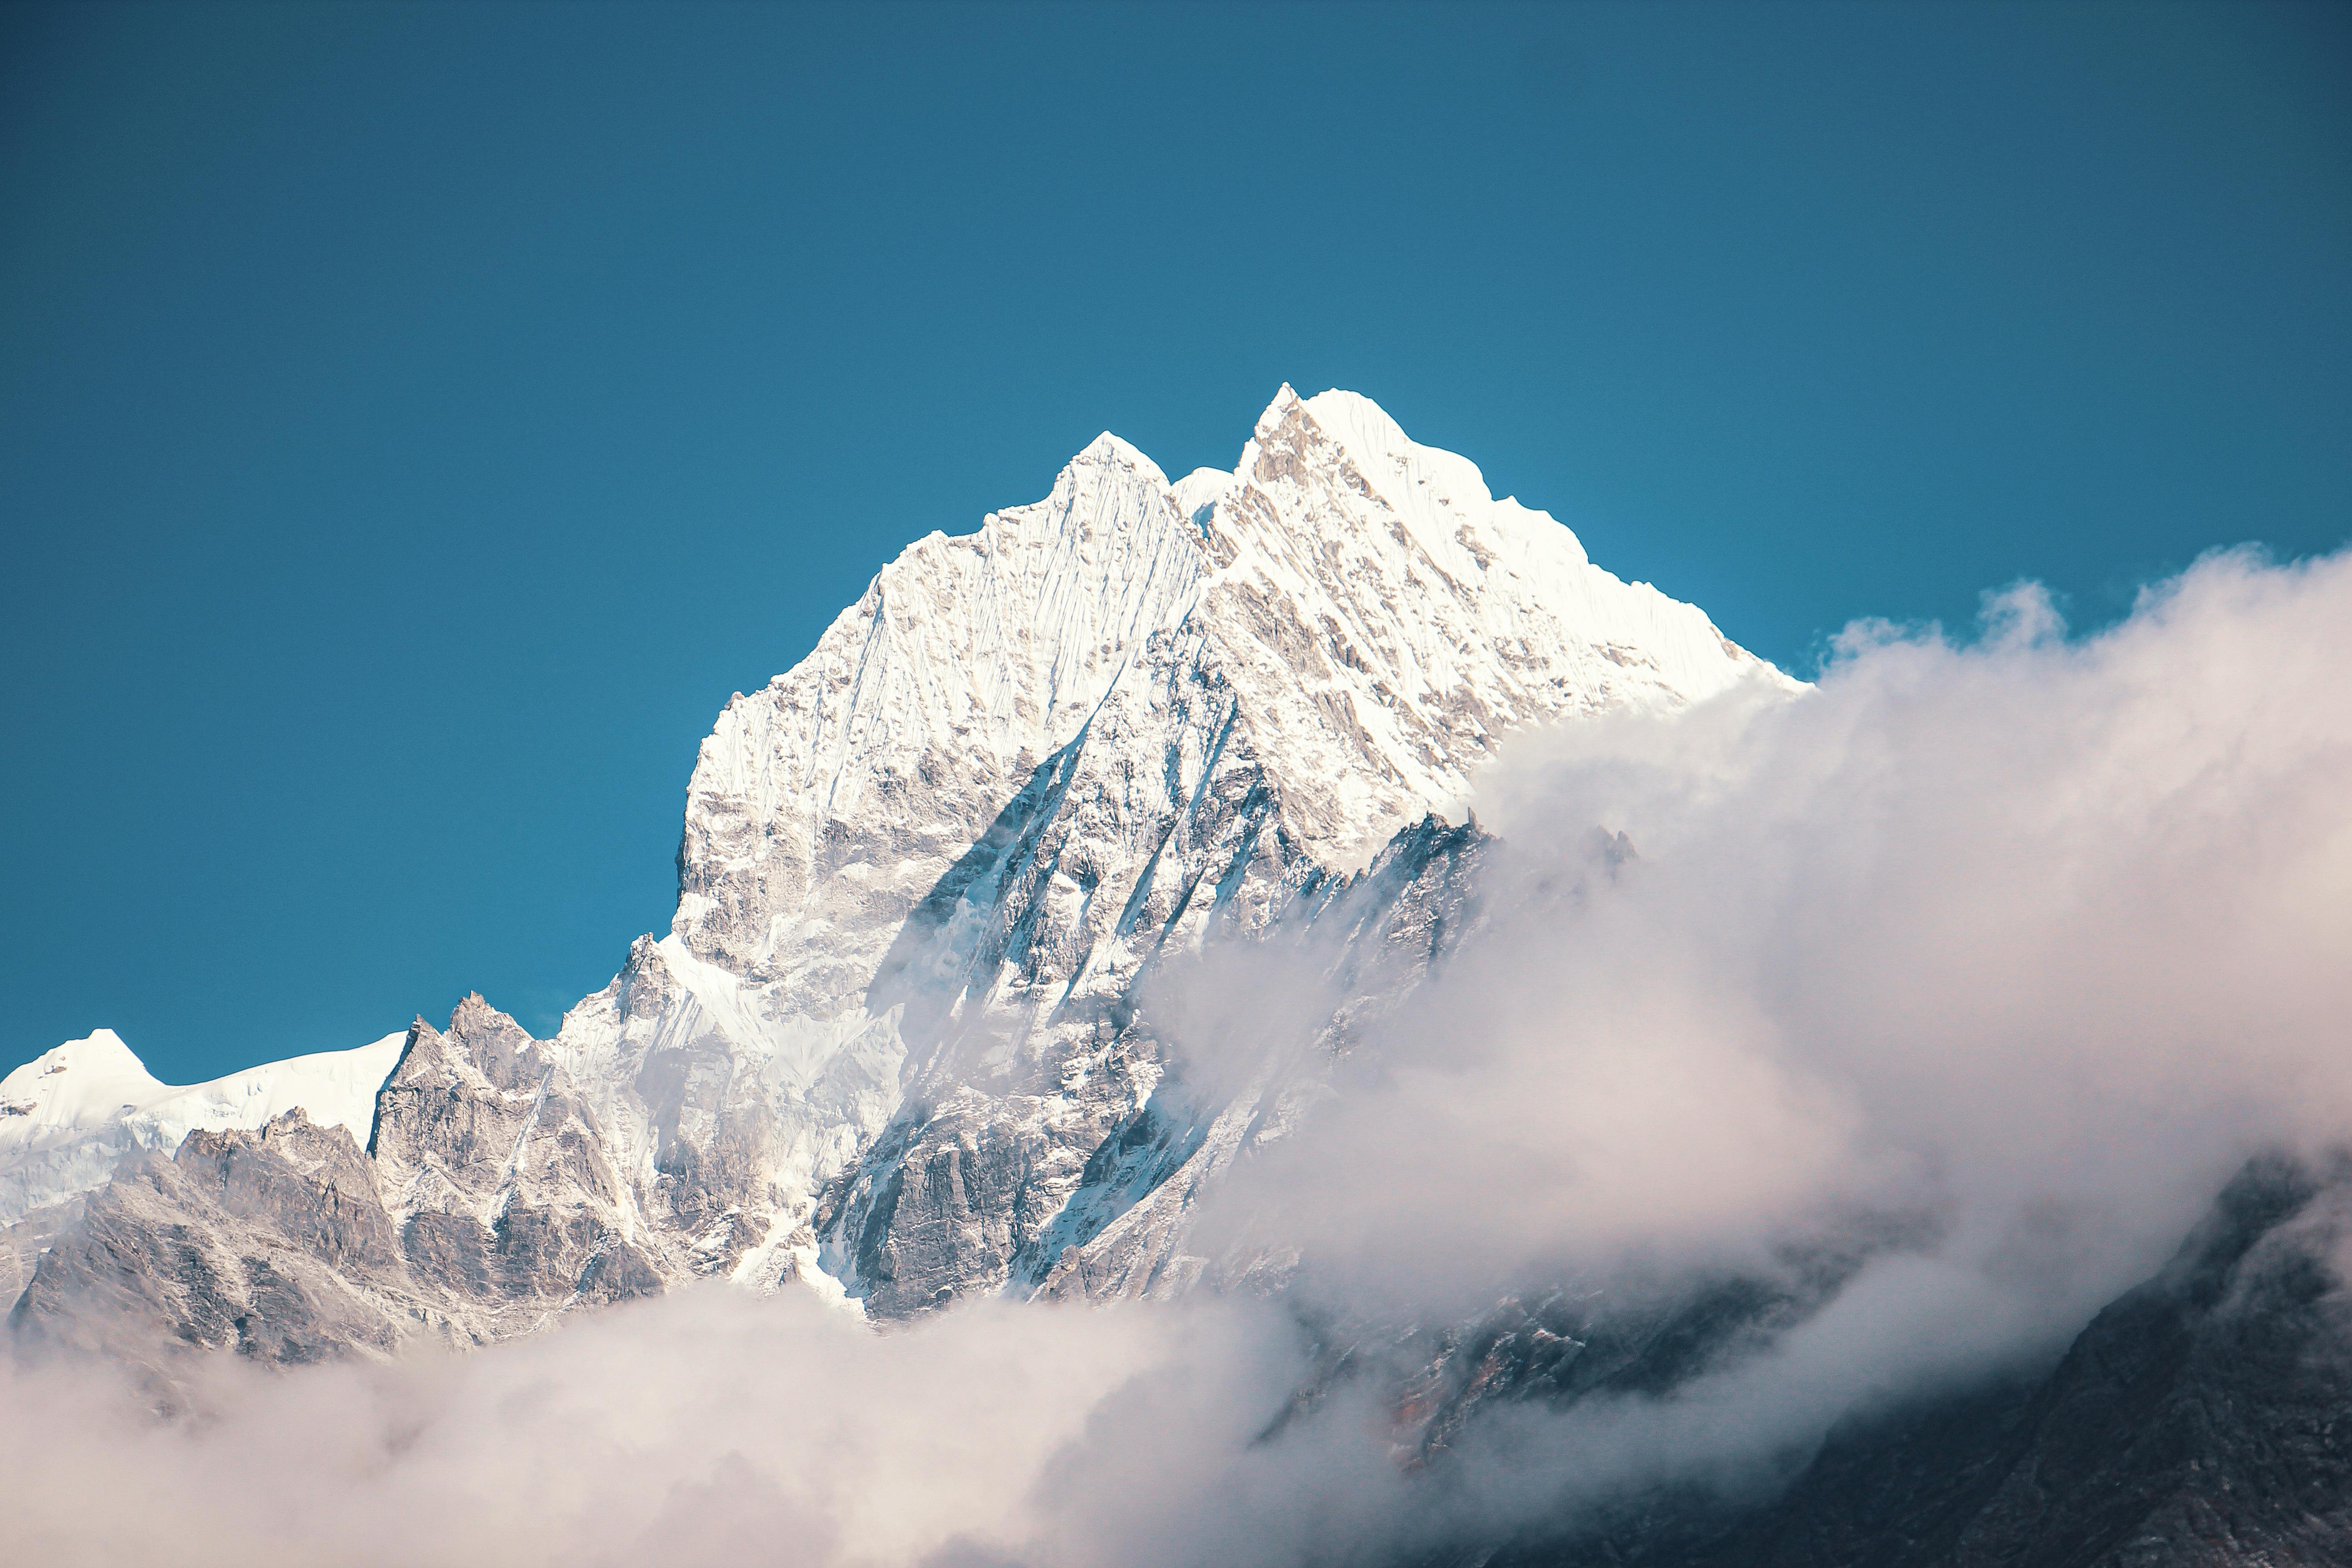 Photo by Sulav Loktam: https://www.pexels.com/photo/snow-covered-mountain-under-blue-sky-4360488/